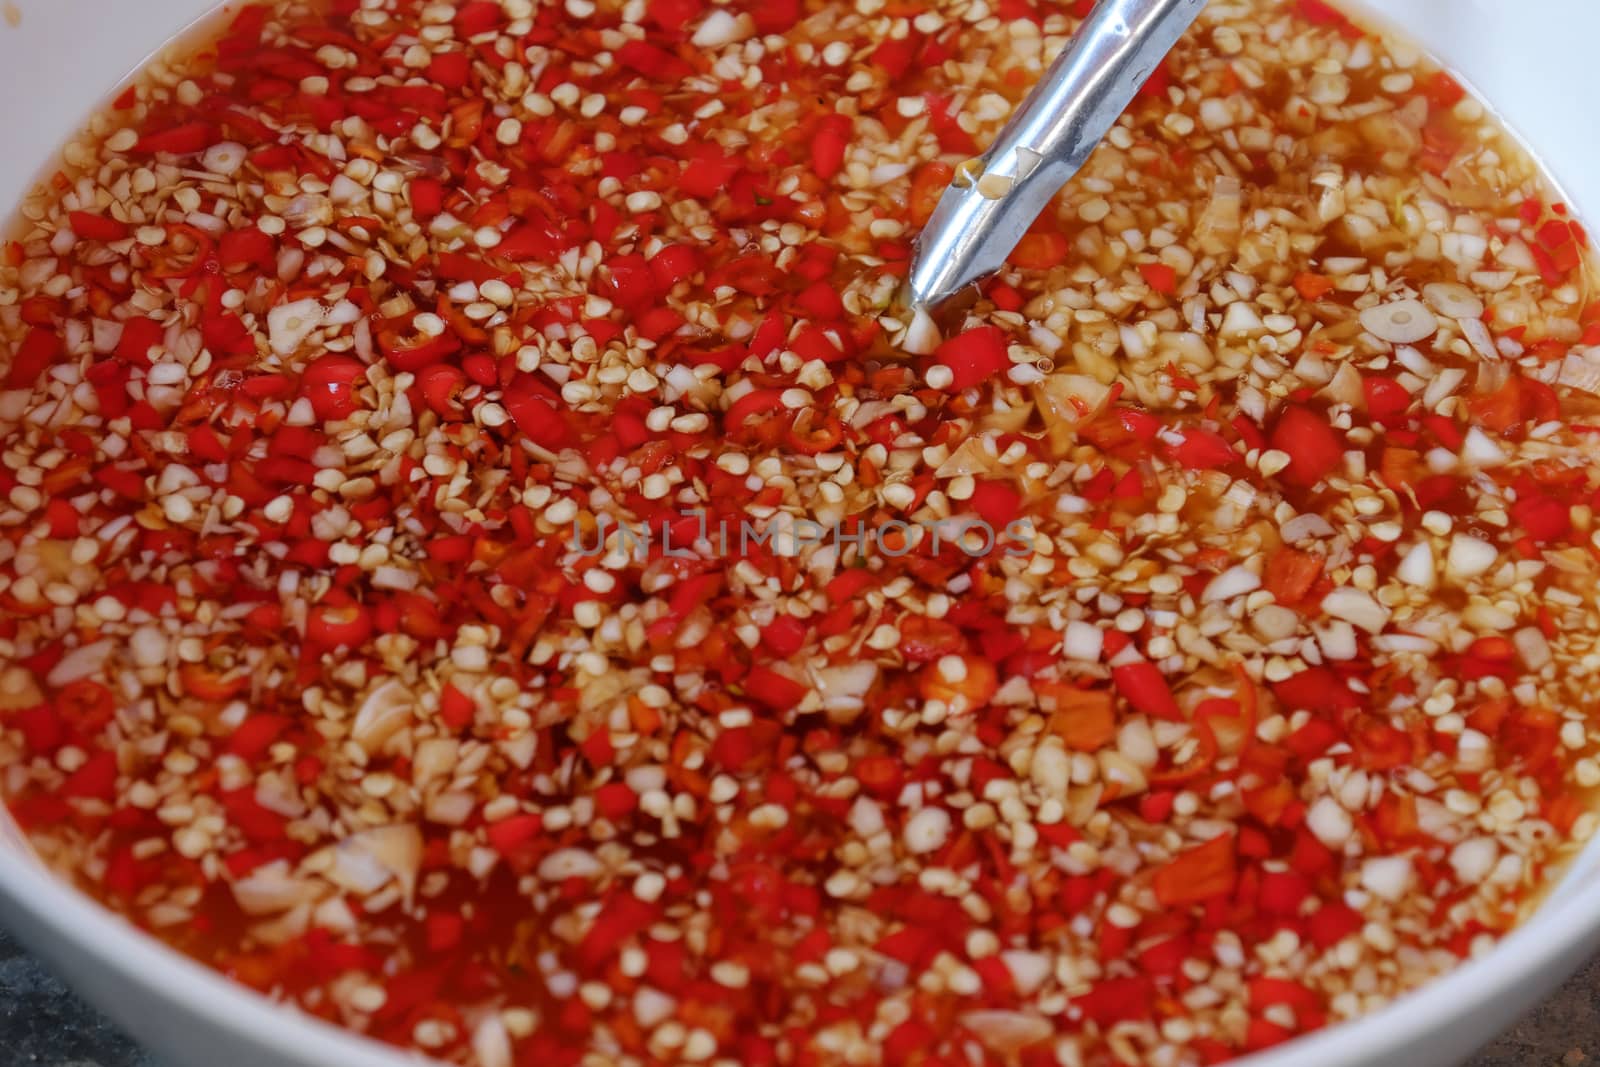 Vietnamese sauce for food, fish sauce with red hot pepper and choped garlic, amazing bowl of red